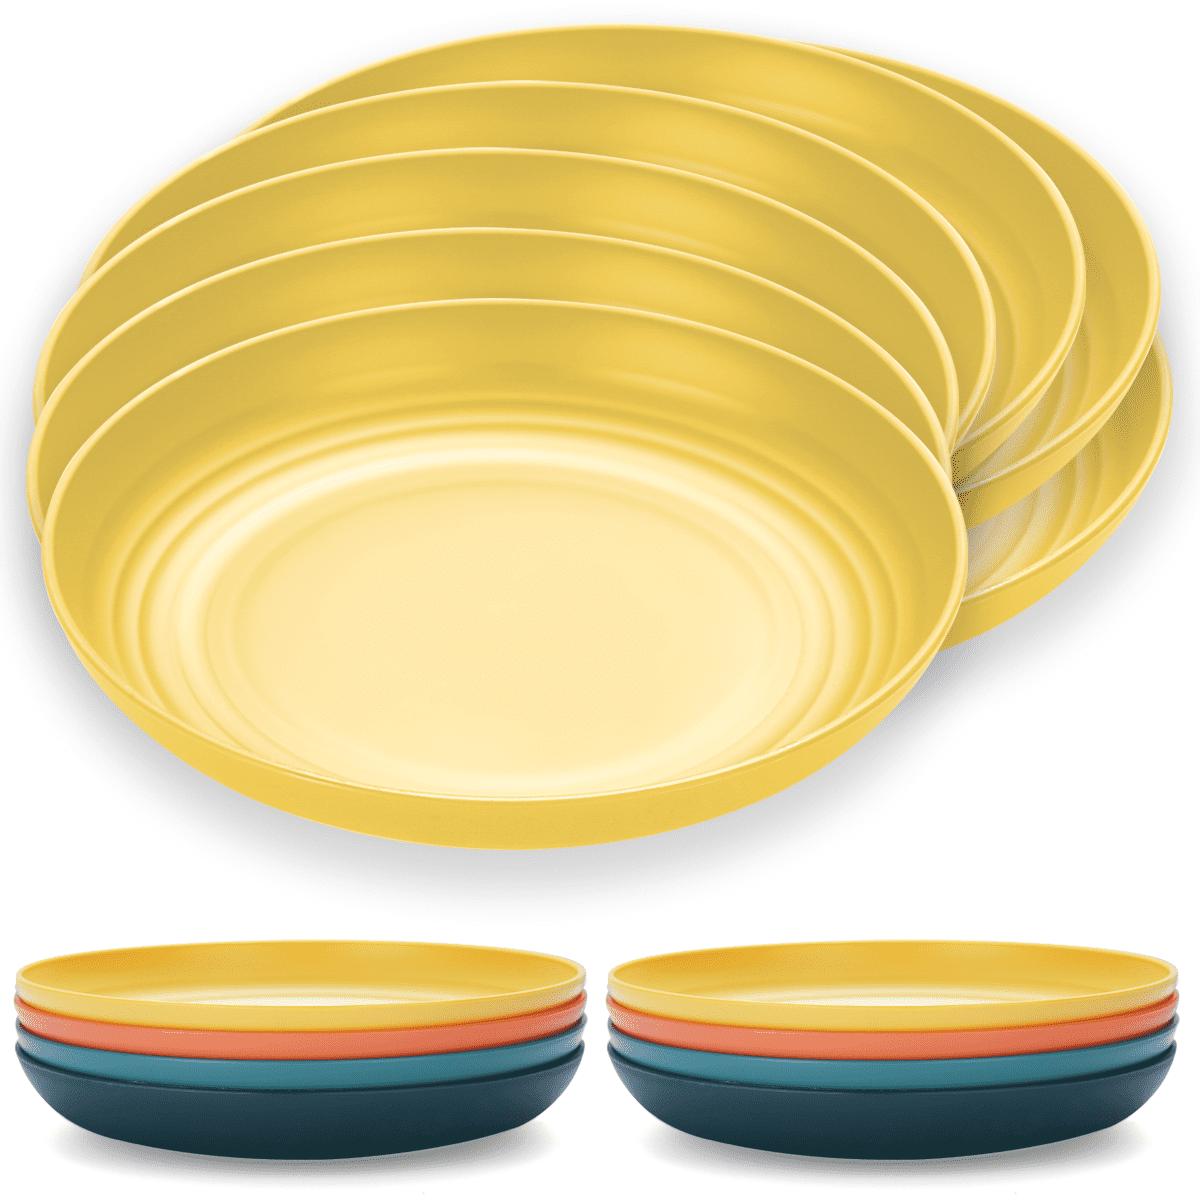 Details about   Lightweight Wheat Straw Plates,Unbreakable Dinner Plates BPA free and Healthy 